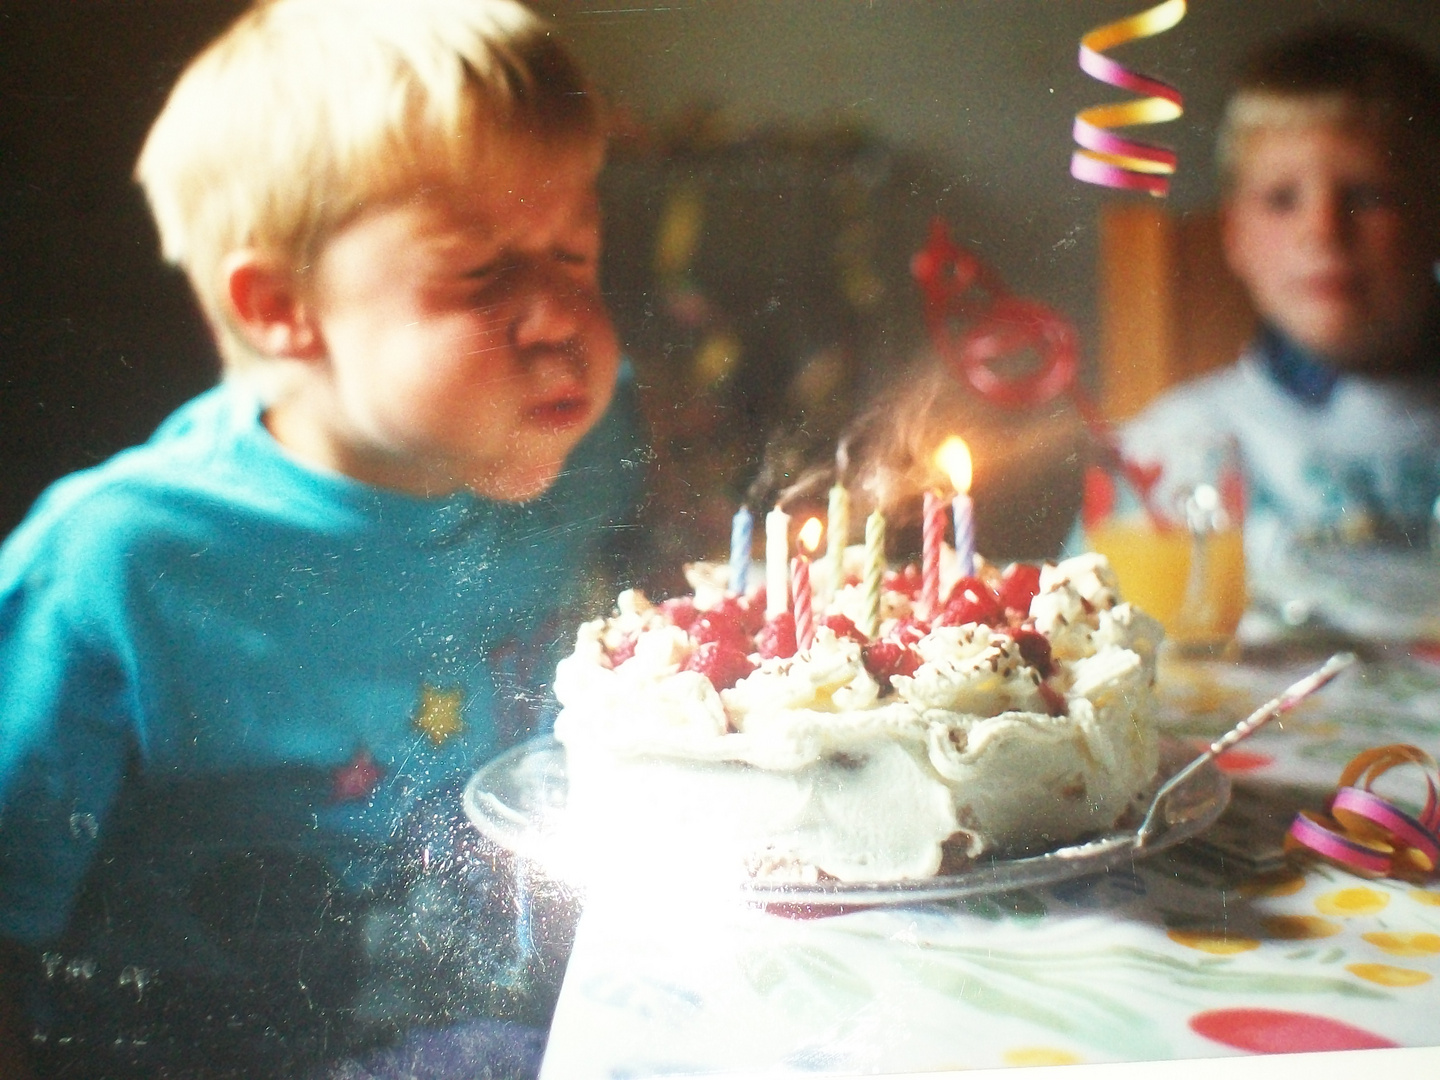 It is important to blow out the birthdaycandle in a perfect way...